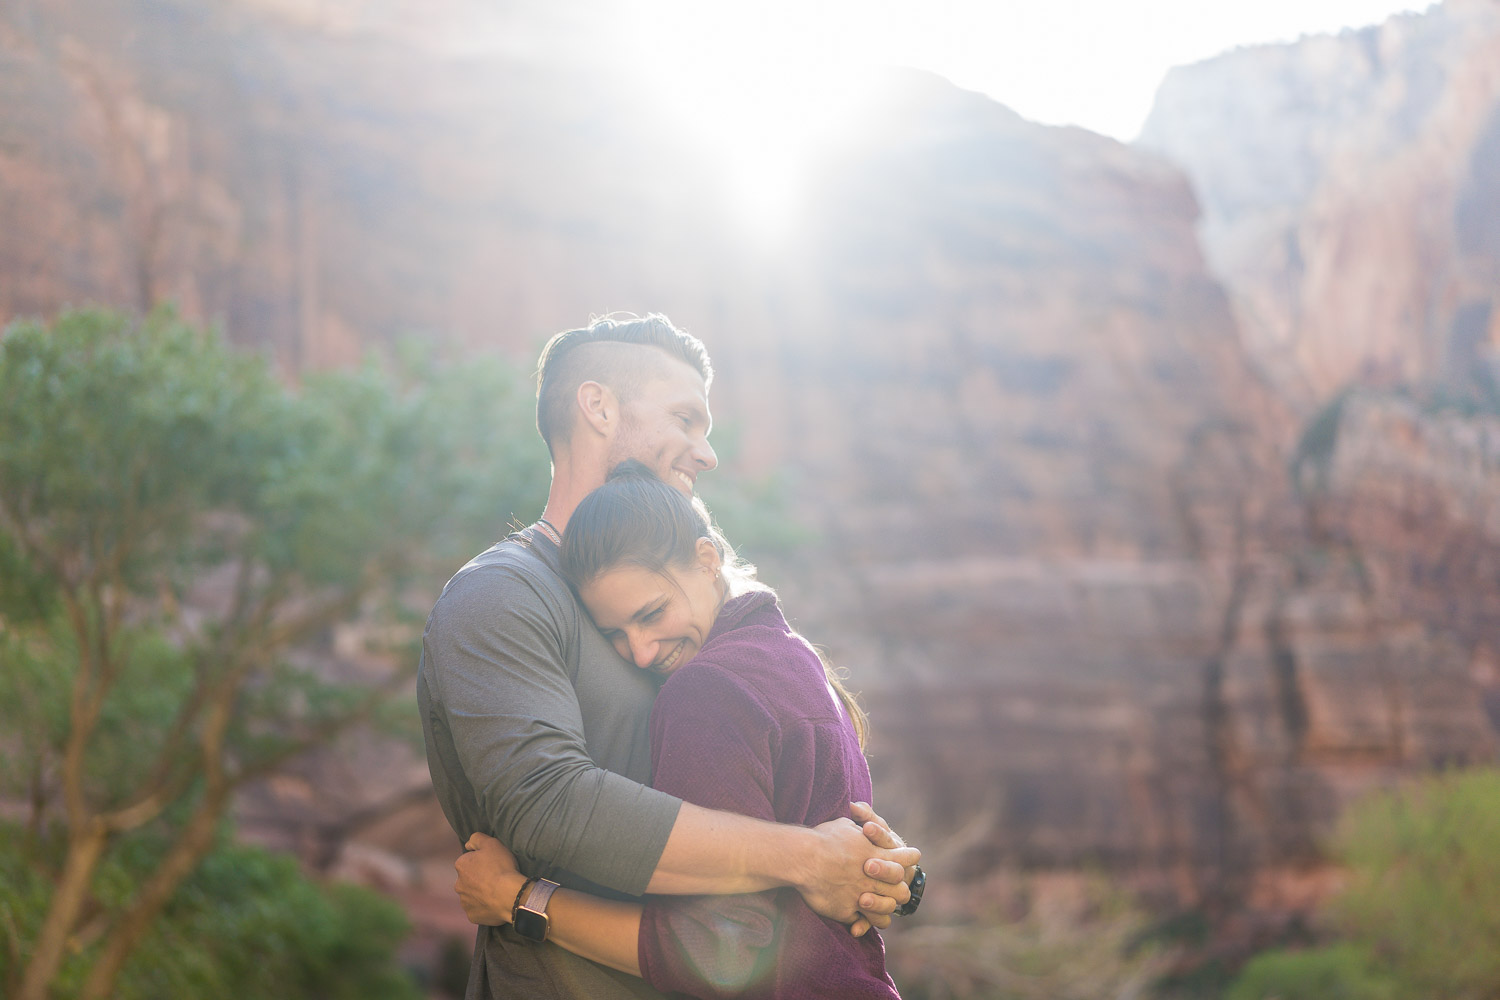 Zion National Park Engagement Photos in zion canyon